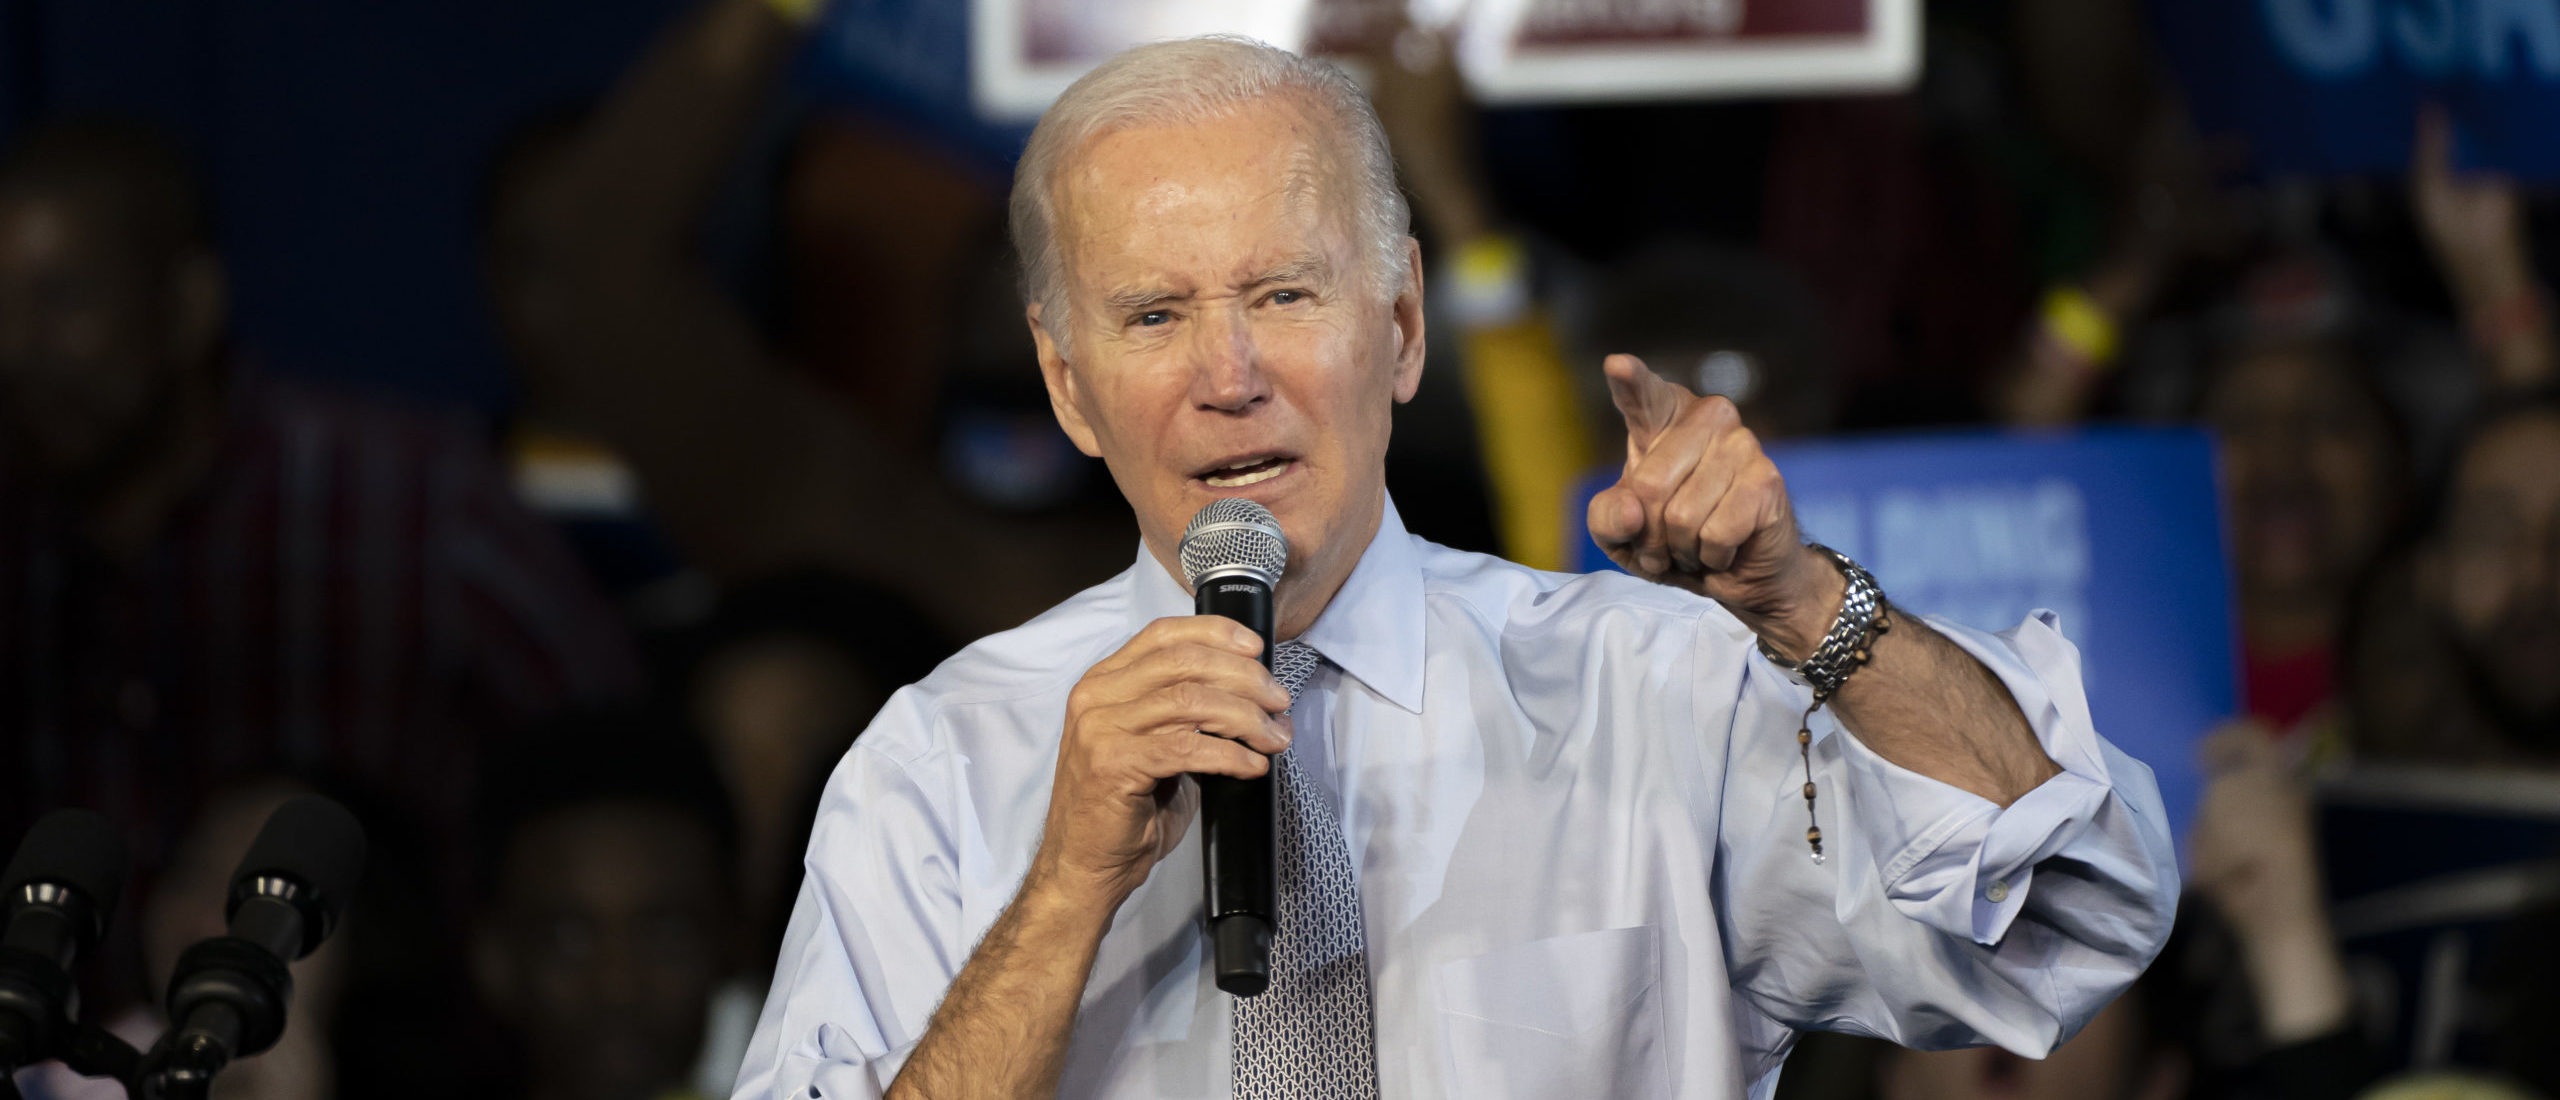 While Decrying Radicals At Home, Biden Has Made The US An Extremist Outlier